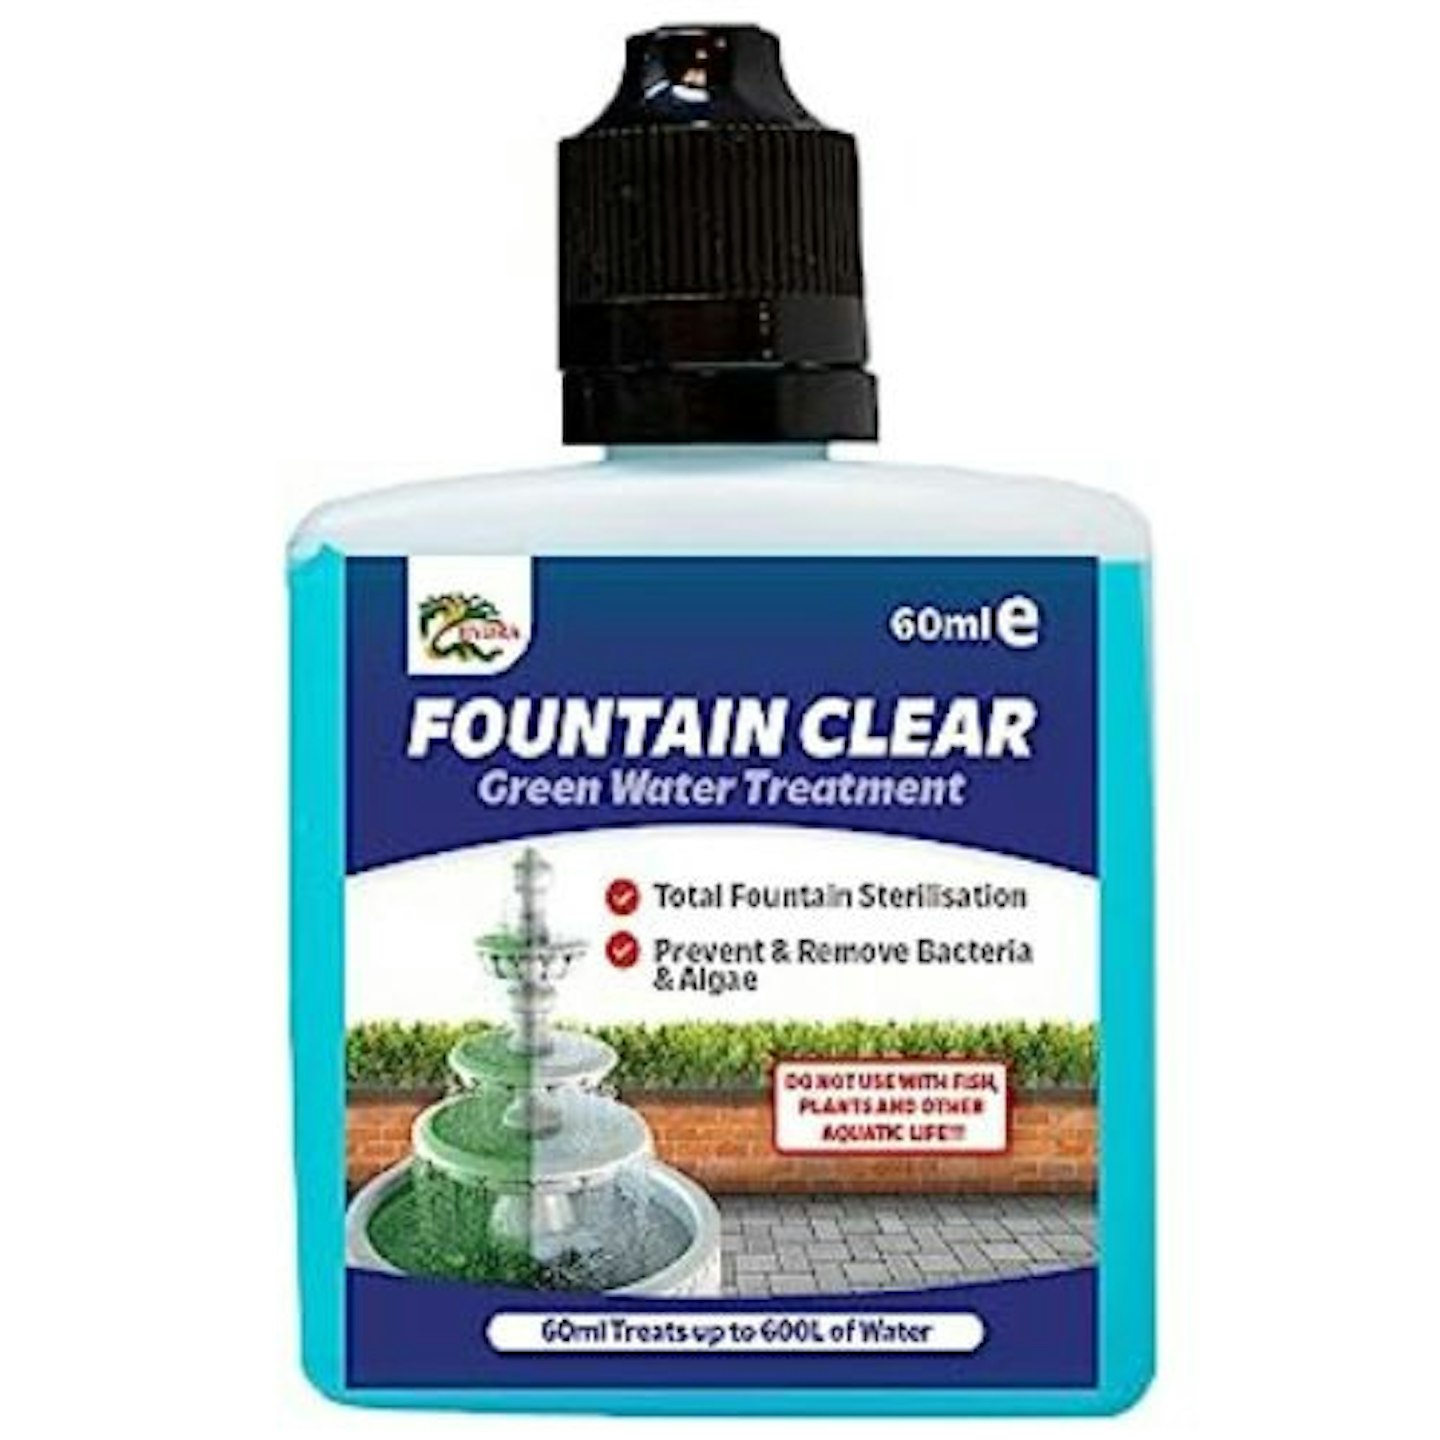 Hydra Fountain Clear Water Feature Cleaner